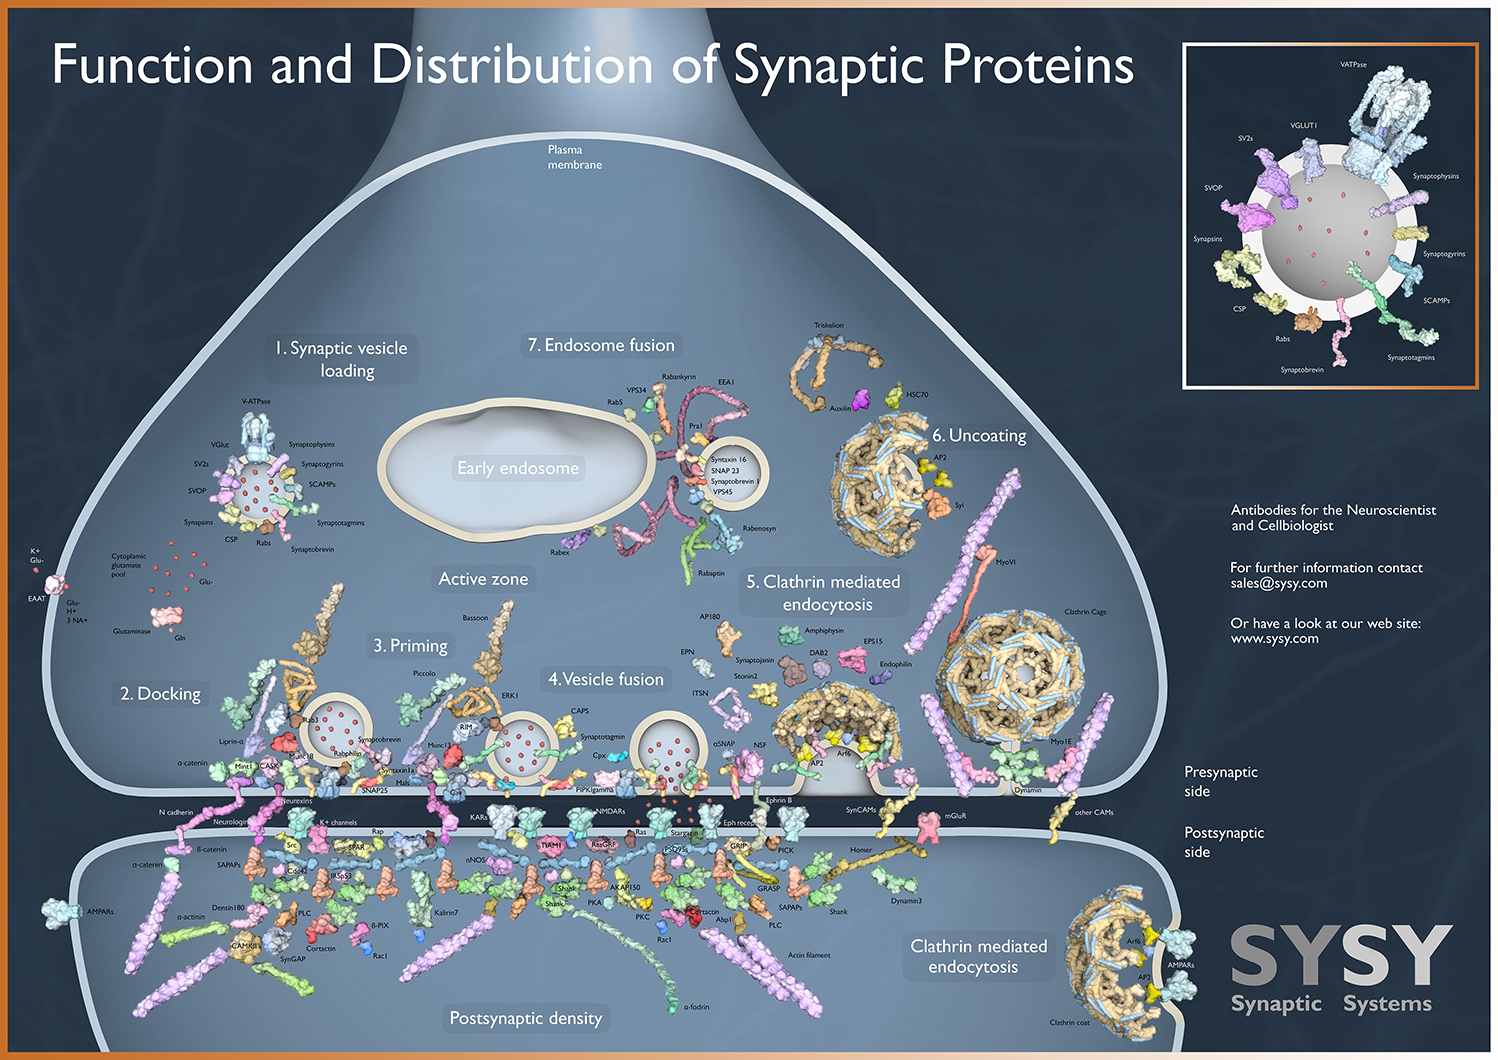 ​A poster image of the function and distribution of several synaptic proteins. 